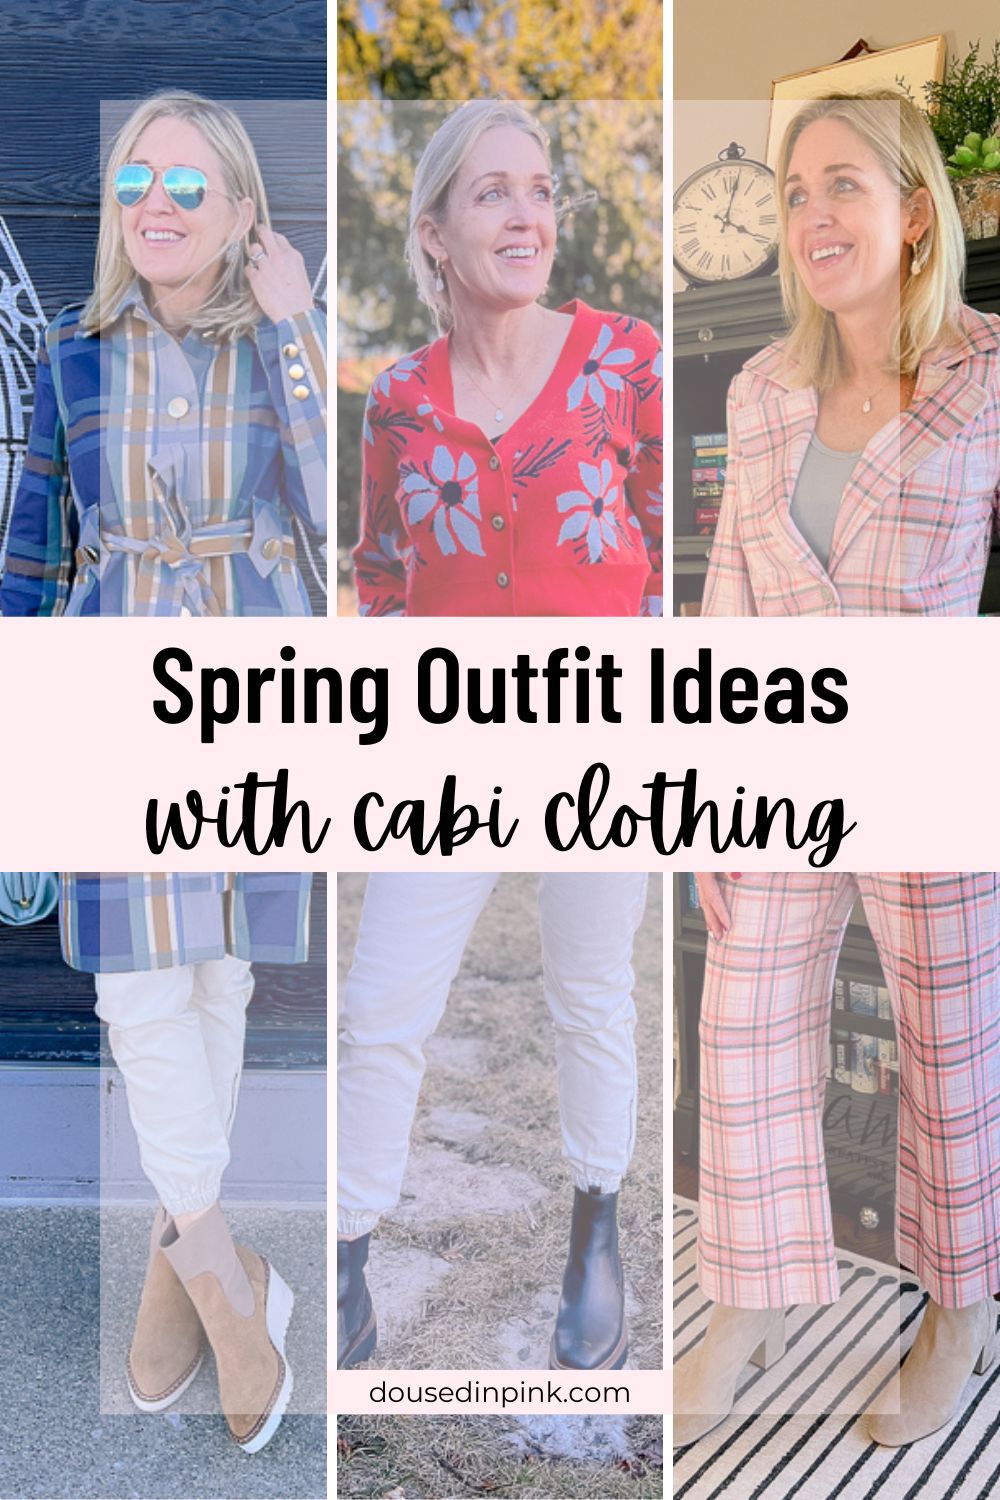 Spring Outfit Ideas with cabi Clothing - Doused in Pink